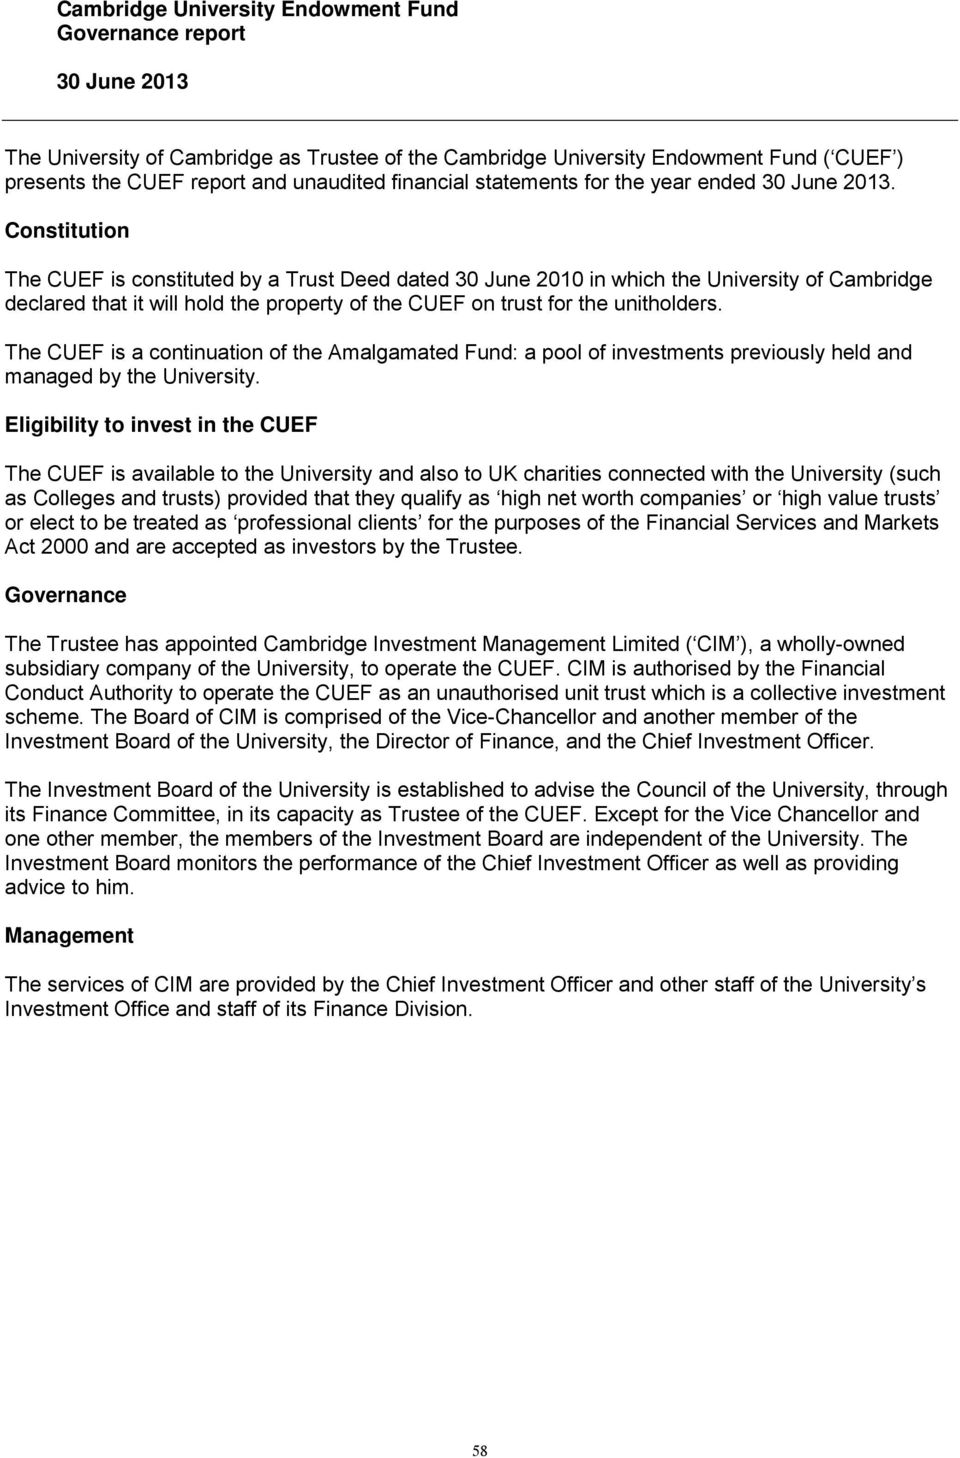 Constitution The CUEF is constituted by a Trust Deed dated 30 June 2010 in which the University of Cambridge declared that it will hold the property of the CUEF on trust for the unitholders.